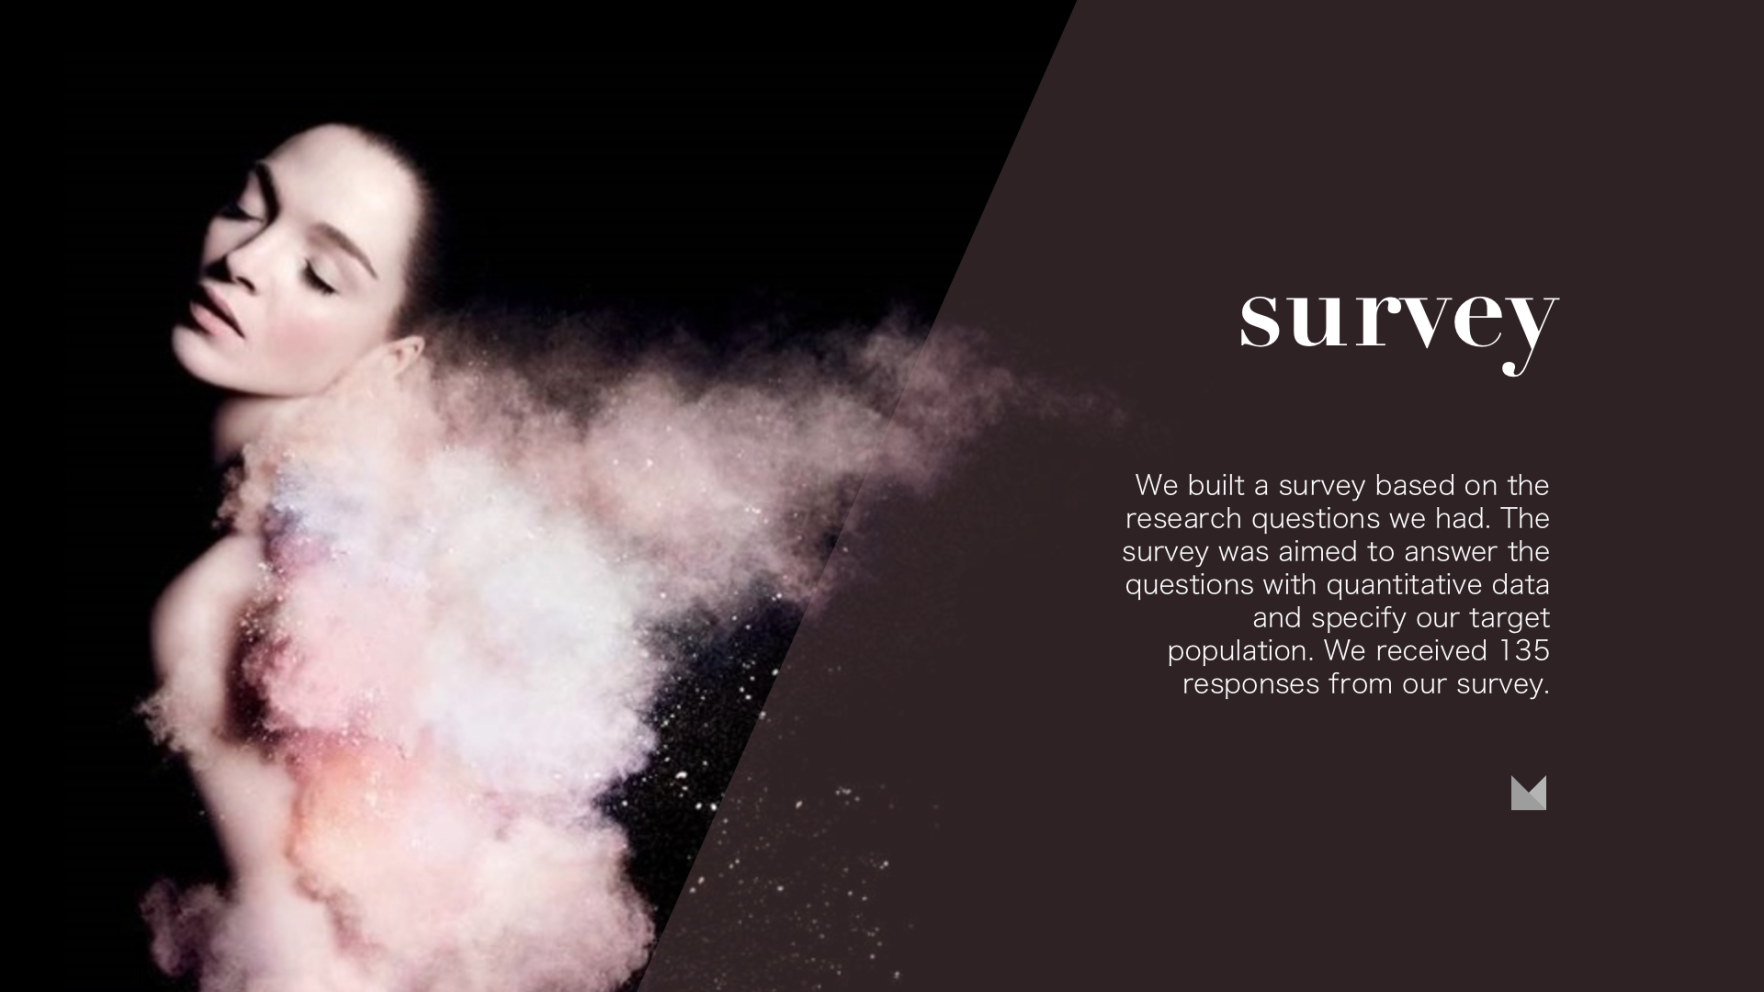 Survey.  We built a survey based on our research questions.  The survey was aimed to answer the questions with quantitative data and specify our target population.  We received 135 responses from our survey.